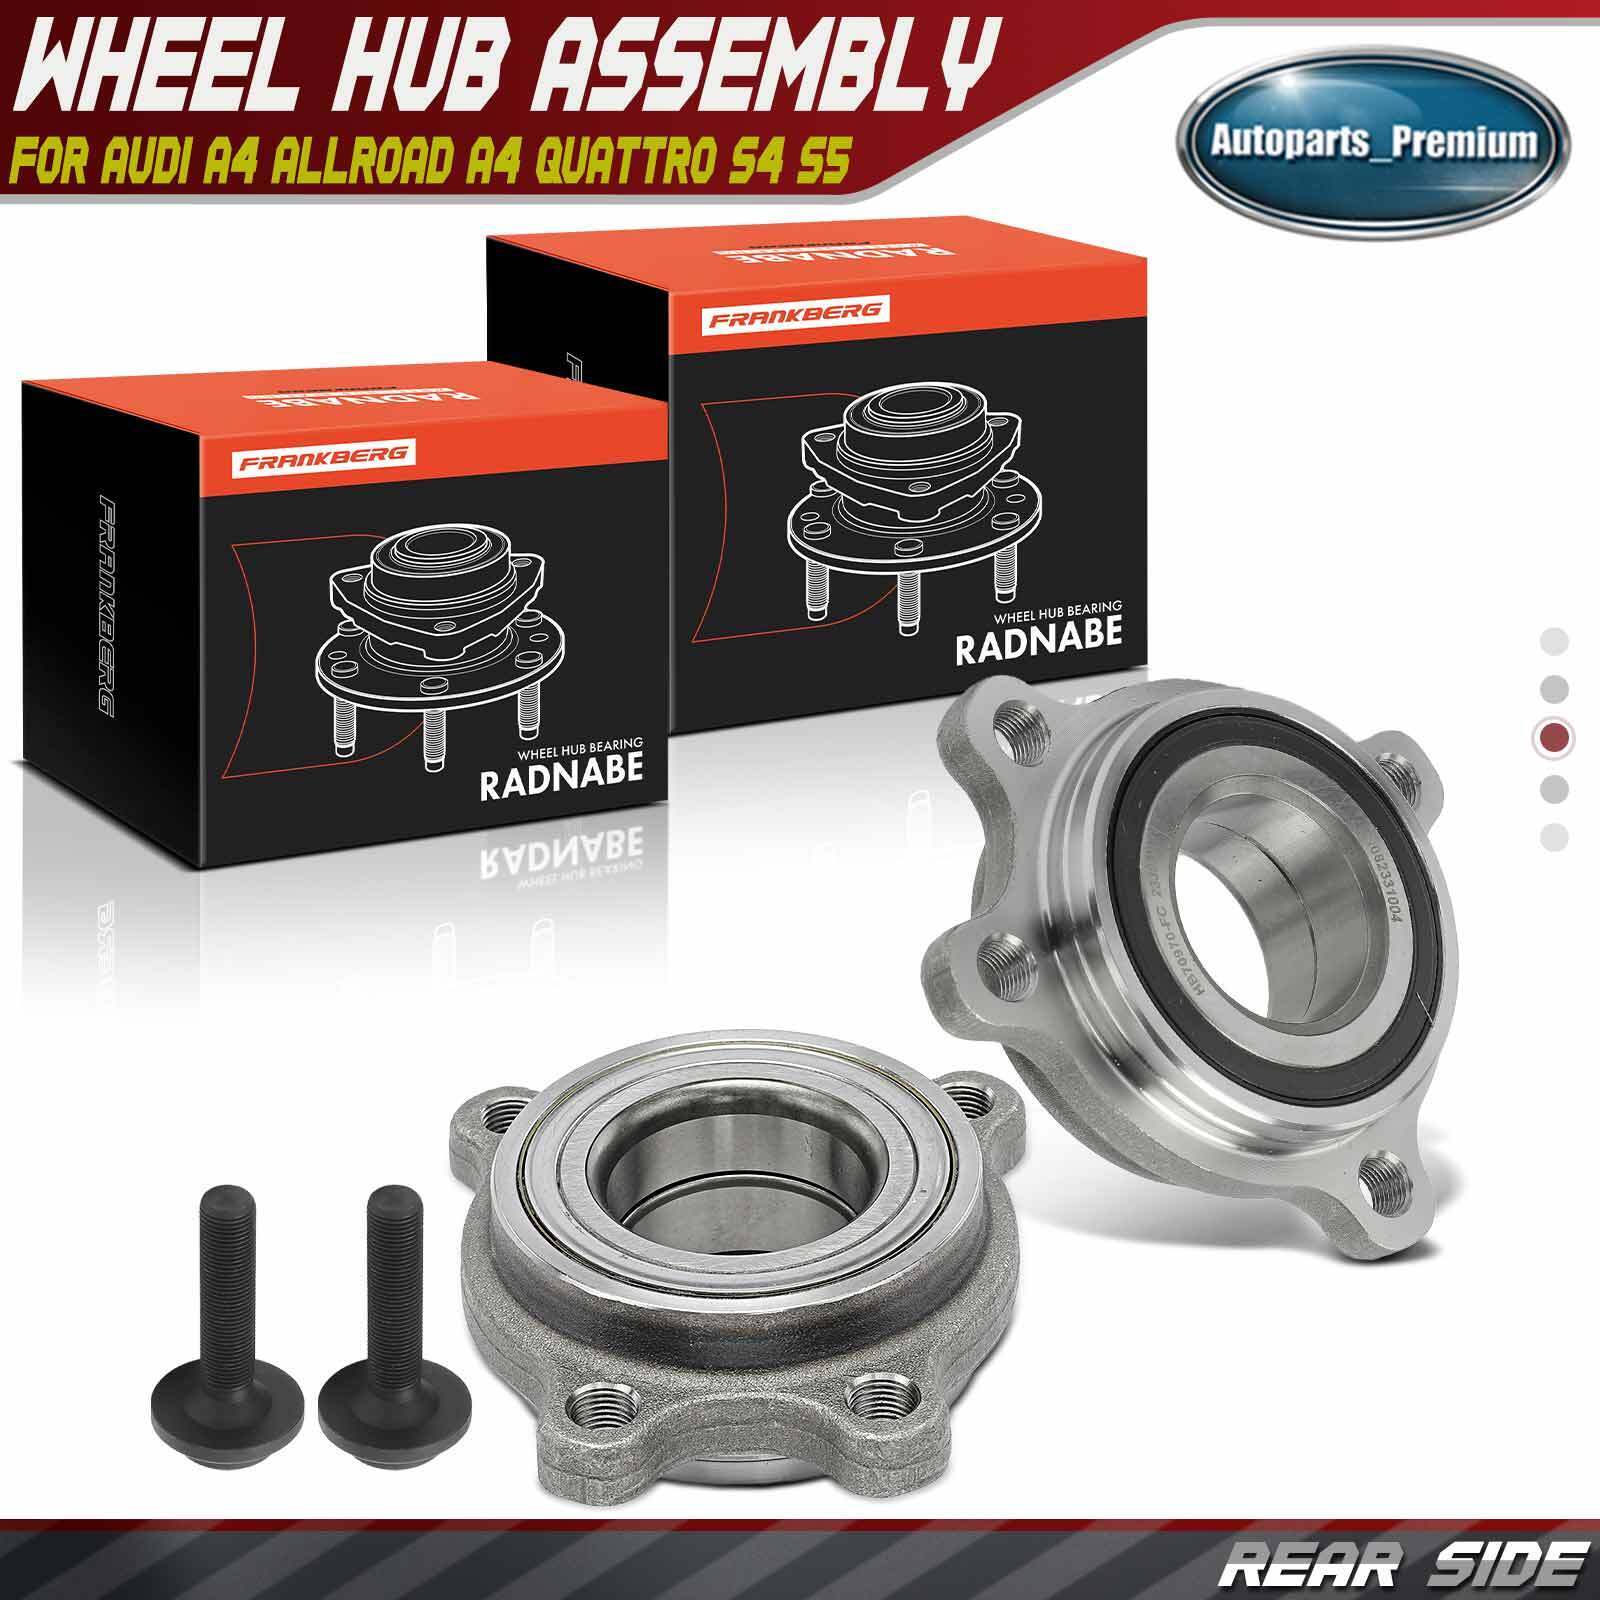 2x Rear Left & Right Wheel Hub Bearing for Audi A4 allroad A4 Quattro S4 S5 RS5